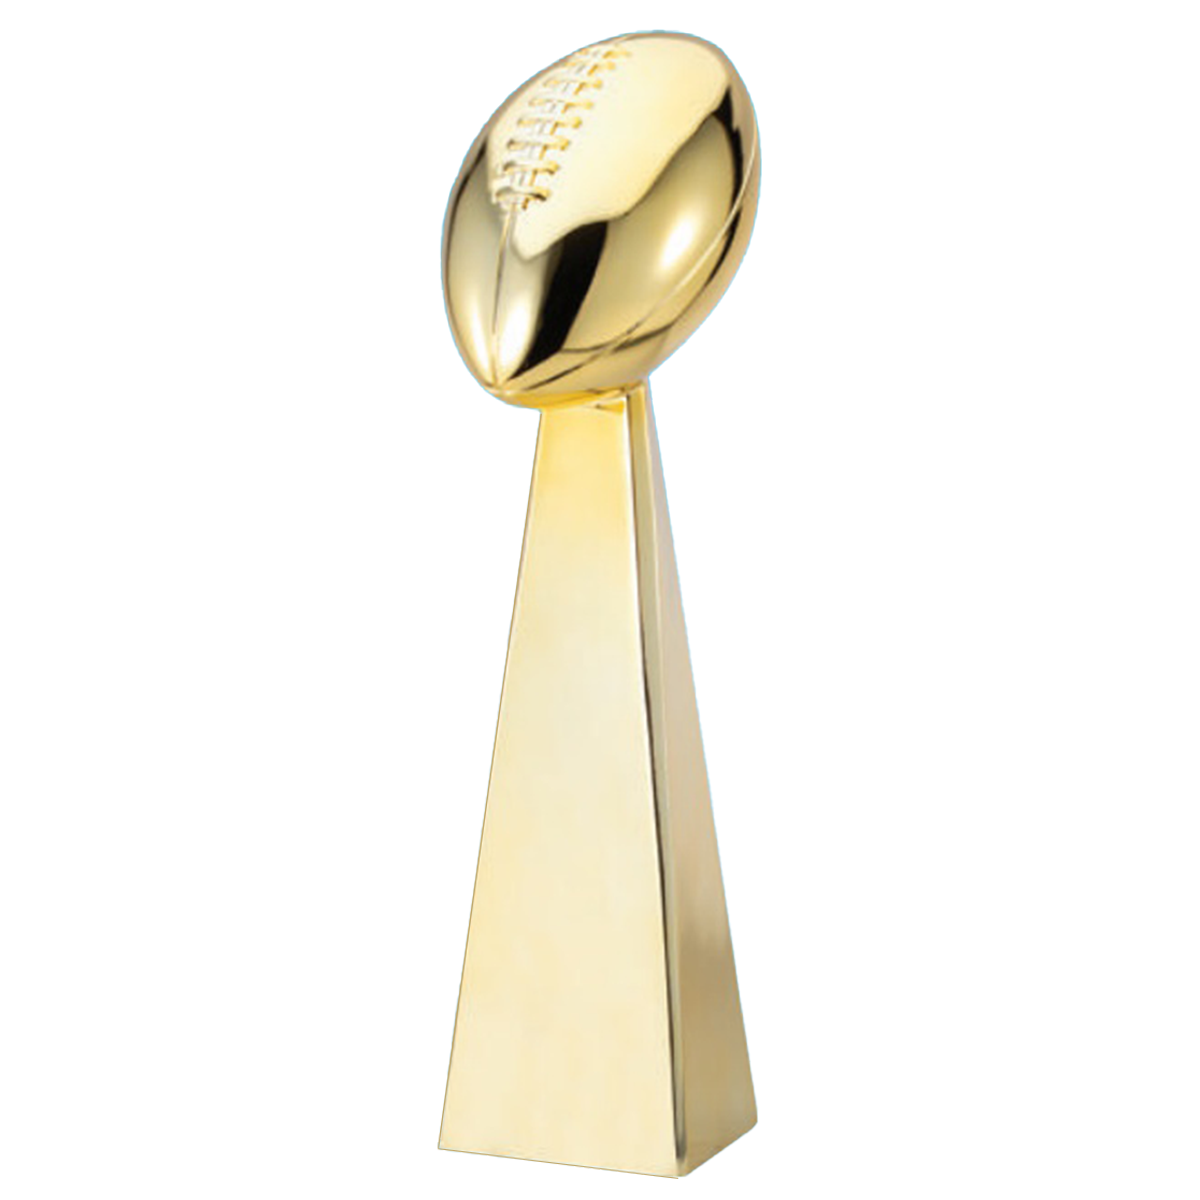 Football Tower Trophy in Gold Finish